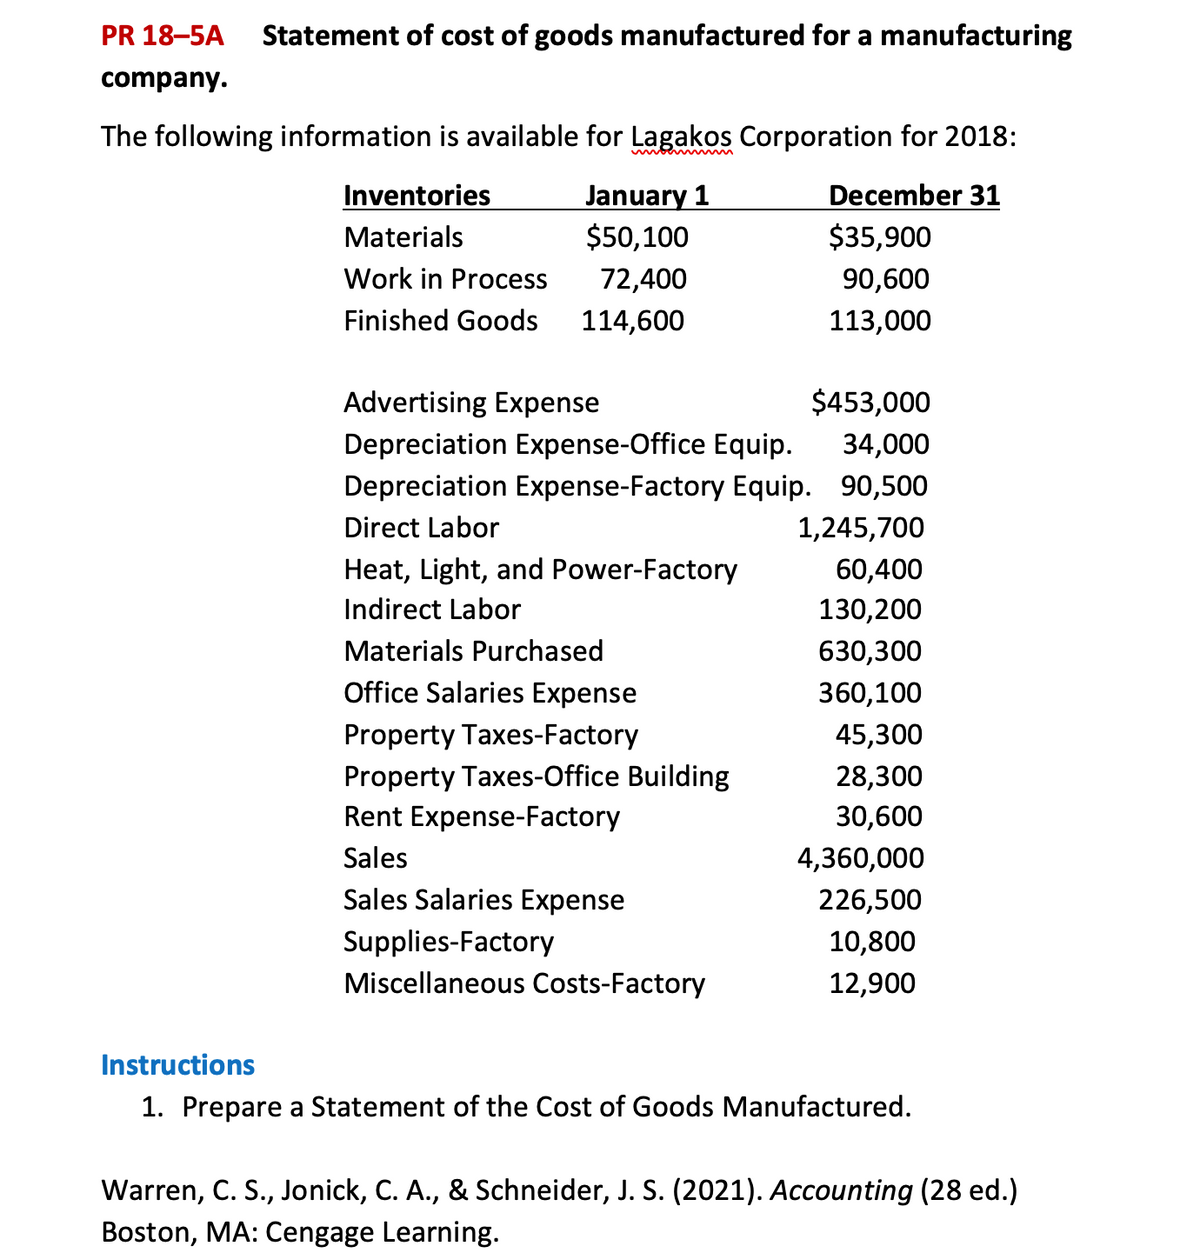 PR 18-5A
Statement of cost of goods manufactured for a manufacturing
company.
The following information is available for Lagakos Corporation for 2018:
January 1
$50,100
December 31
$35,900
Inventories
Materials
Work in Process
72,400
90,600
Finished Goods
114,600
113,000
Advertising Expense
$453,000
Depreciation Expense-Office Equip.
34,000
Depreciation Expense-Factory Equip. 90,500
Direct Labor
1,245,700
Heat, Light, and Power-Factory
60,400
Indirect Labor
130,200
Materials Purchased
630,300
Office Salaries Expense
360,100
Property Taxes-Factory
45,300
Property Taxes-Office Building
Rent Expense-Factory
28,300
30,600
Sales
4,360,000
Sales Salaries Expense
226,500
Supplies-Factory
10,800
Miscellaneous Costs-Factory
12,900
Instructions
1. Prepare a Statement of the Cost of Goods Manufactured.
Warren, C. S., Jonick, C. A., & Schneider, J. S. (2021). Accounting (28 ed.)
Boston, MA: Cengage Learning.
